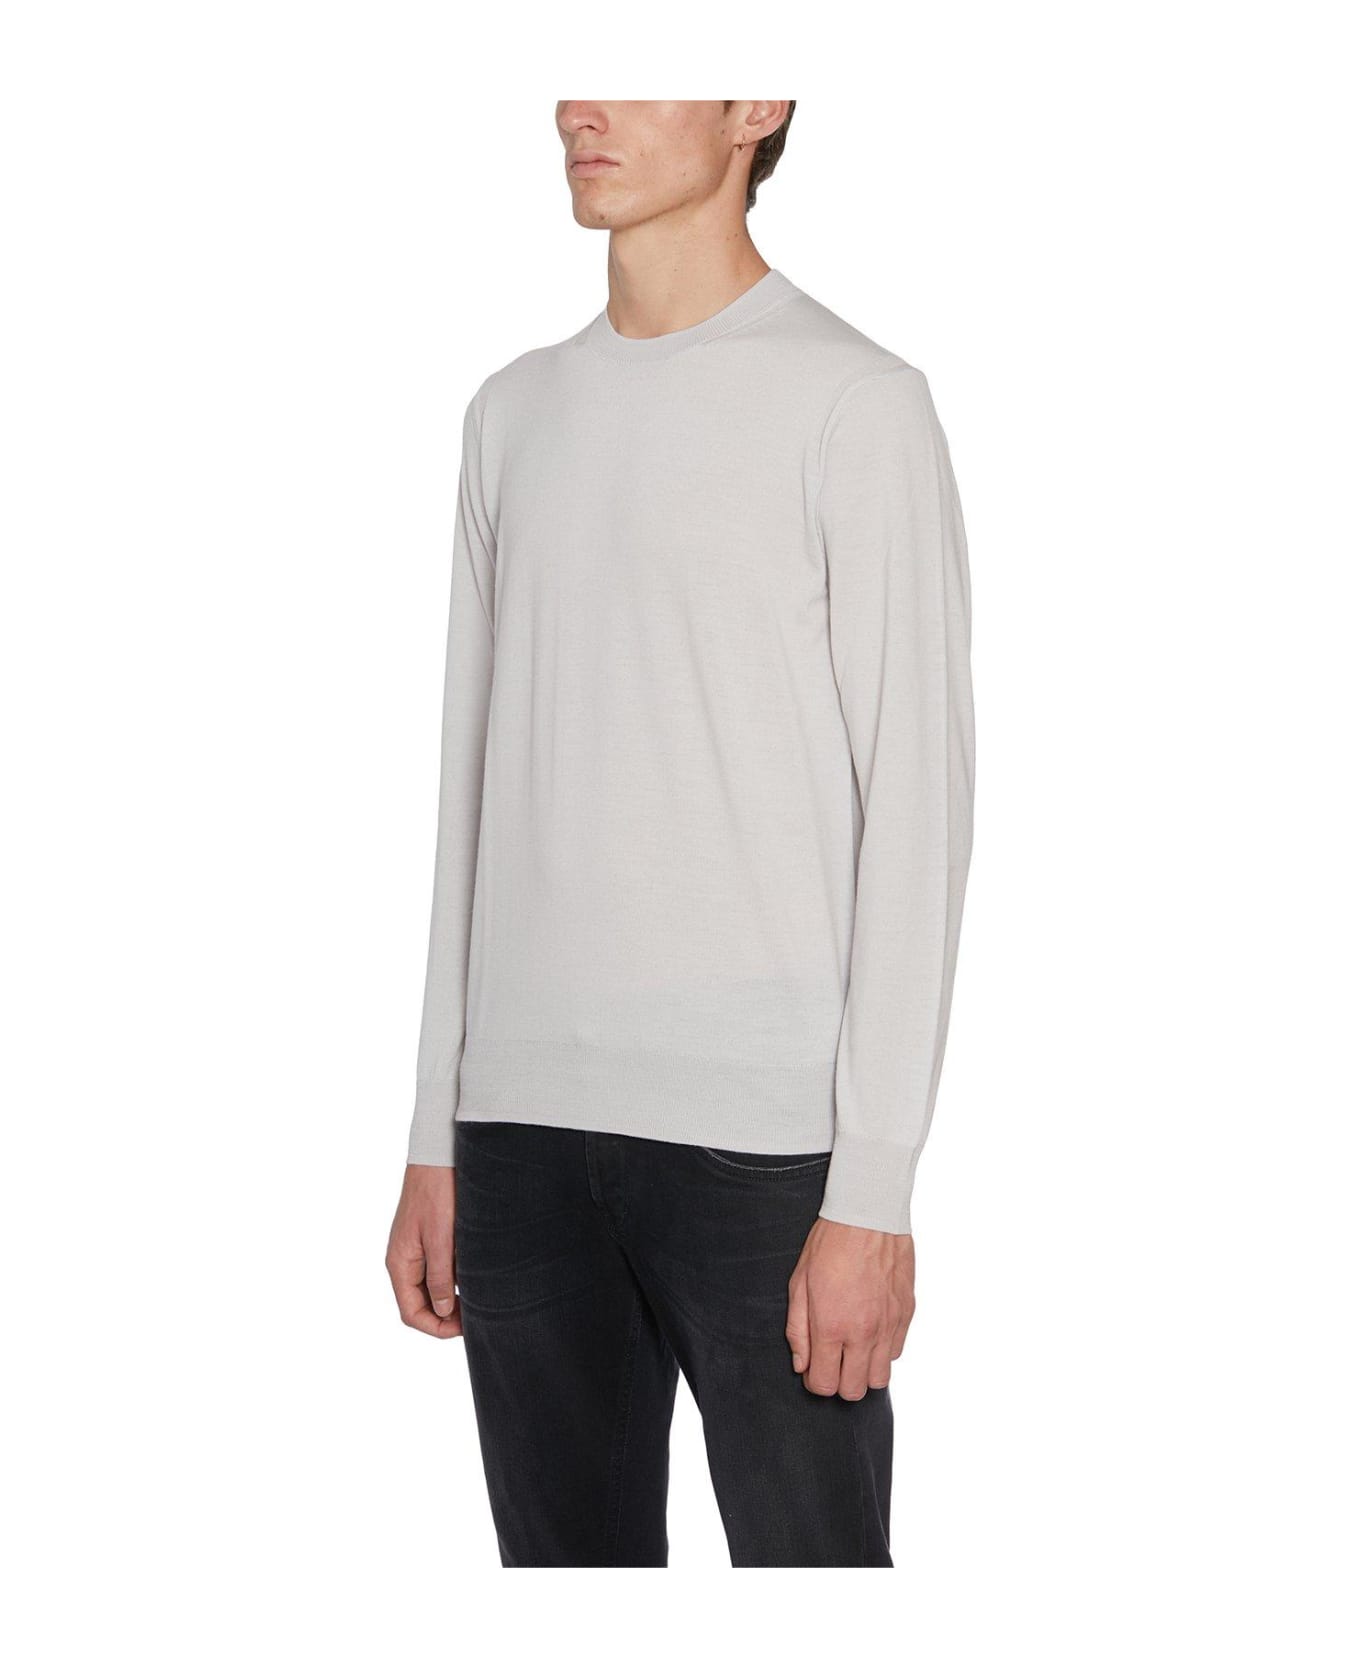 Paolo Pecora Long Sleeved Crewneck Jumper - Gesso フリース